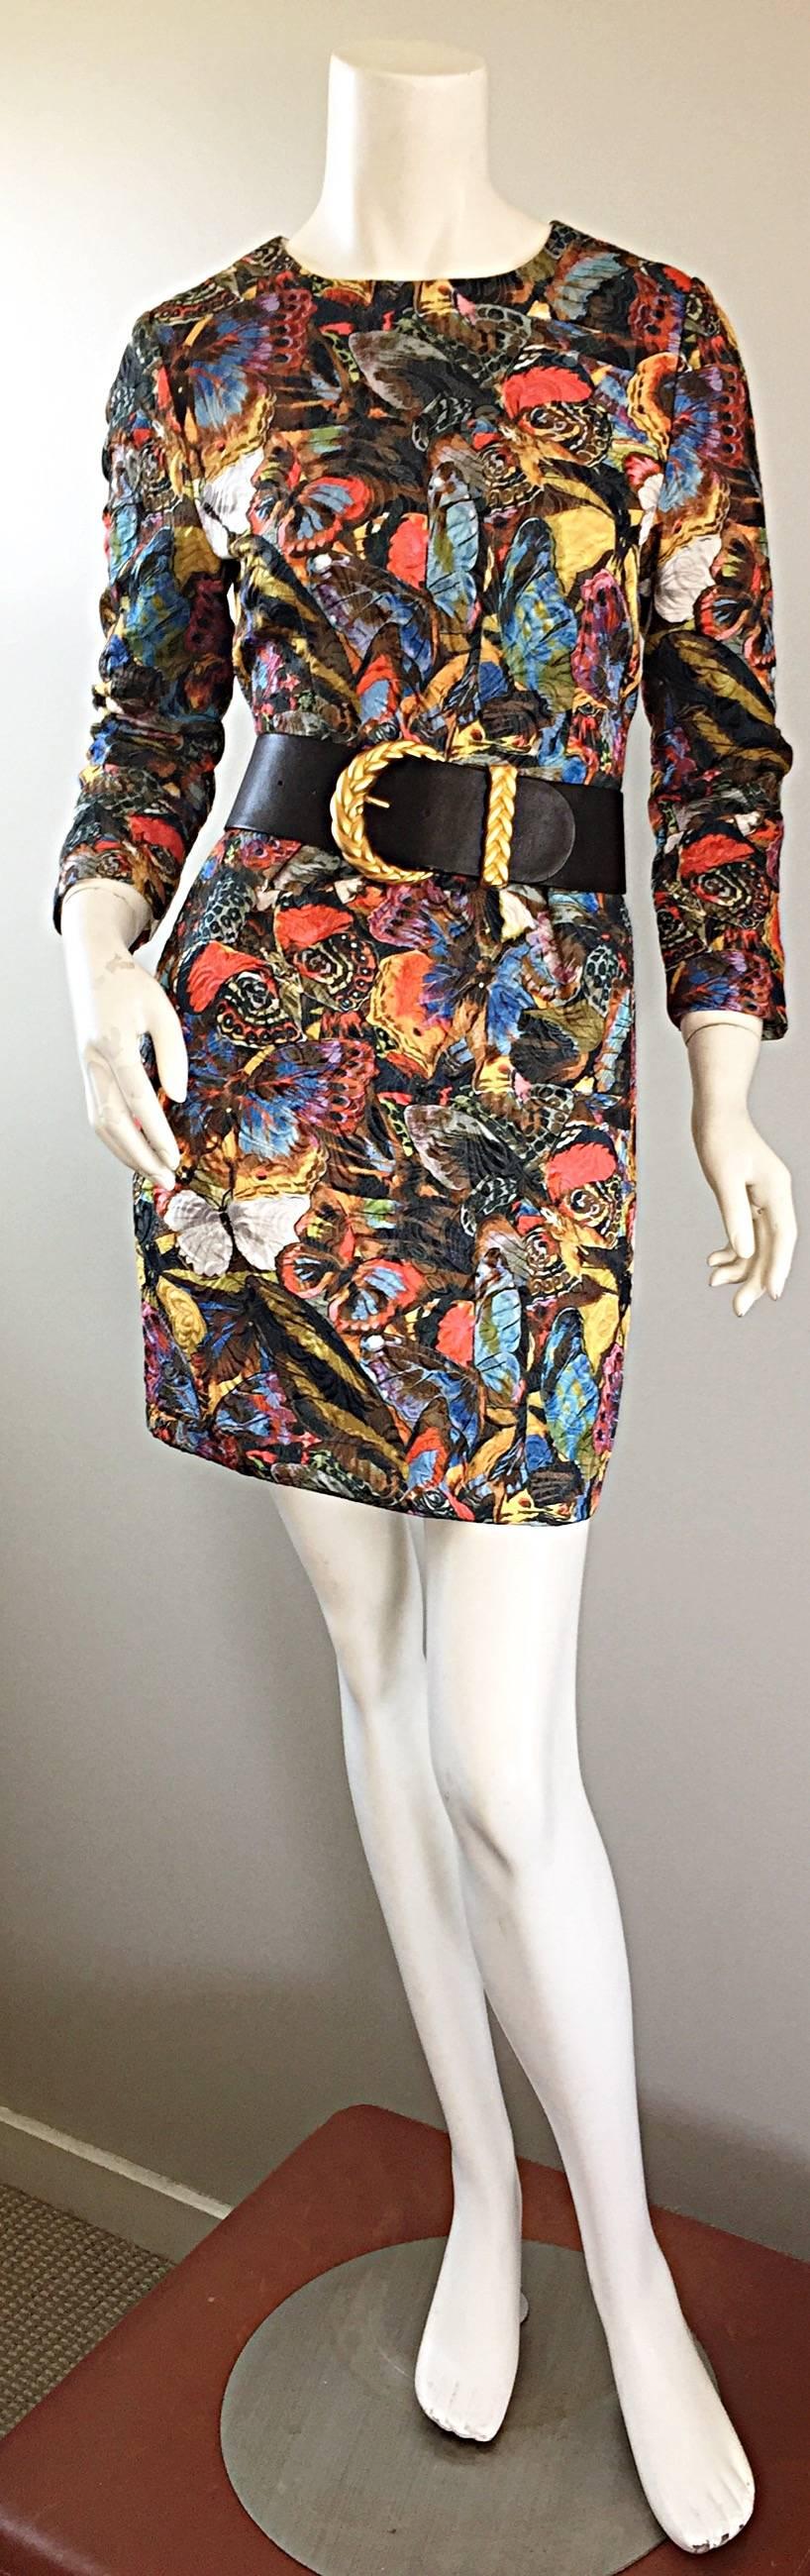 Women's Valentino Sold Out Butterfly Print Beautiful Runway Sample Dress Rt. $4, 300 